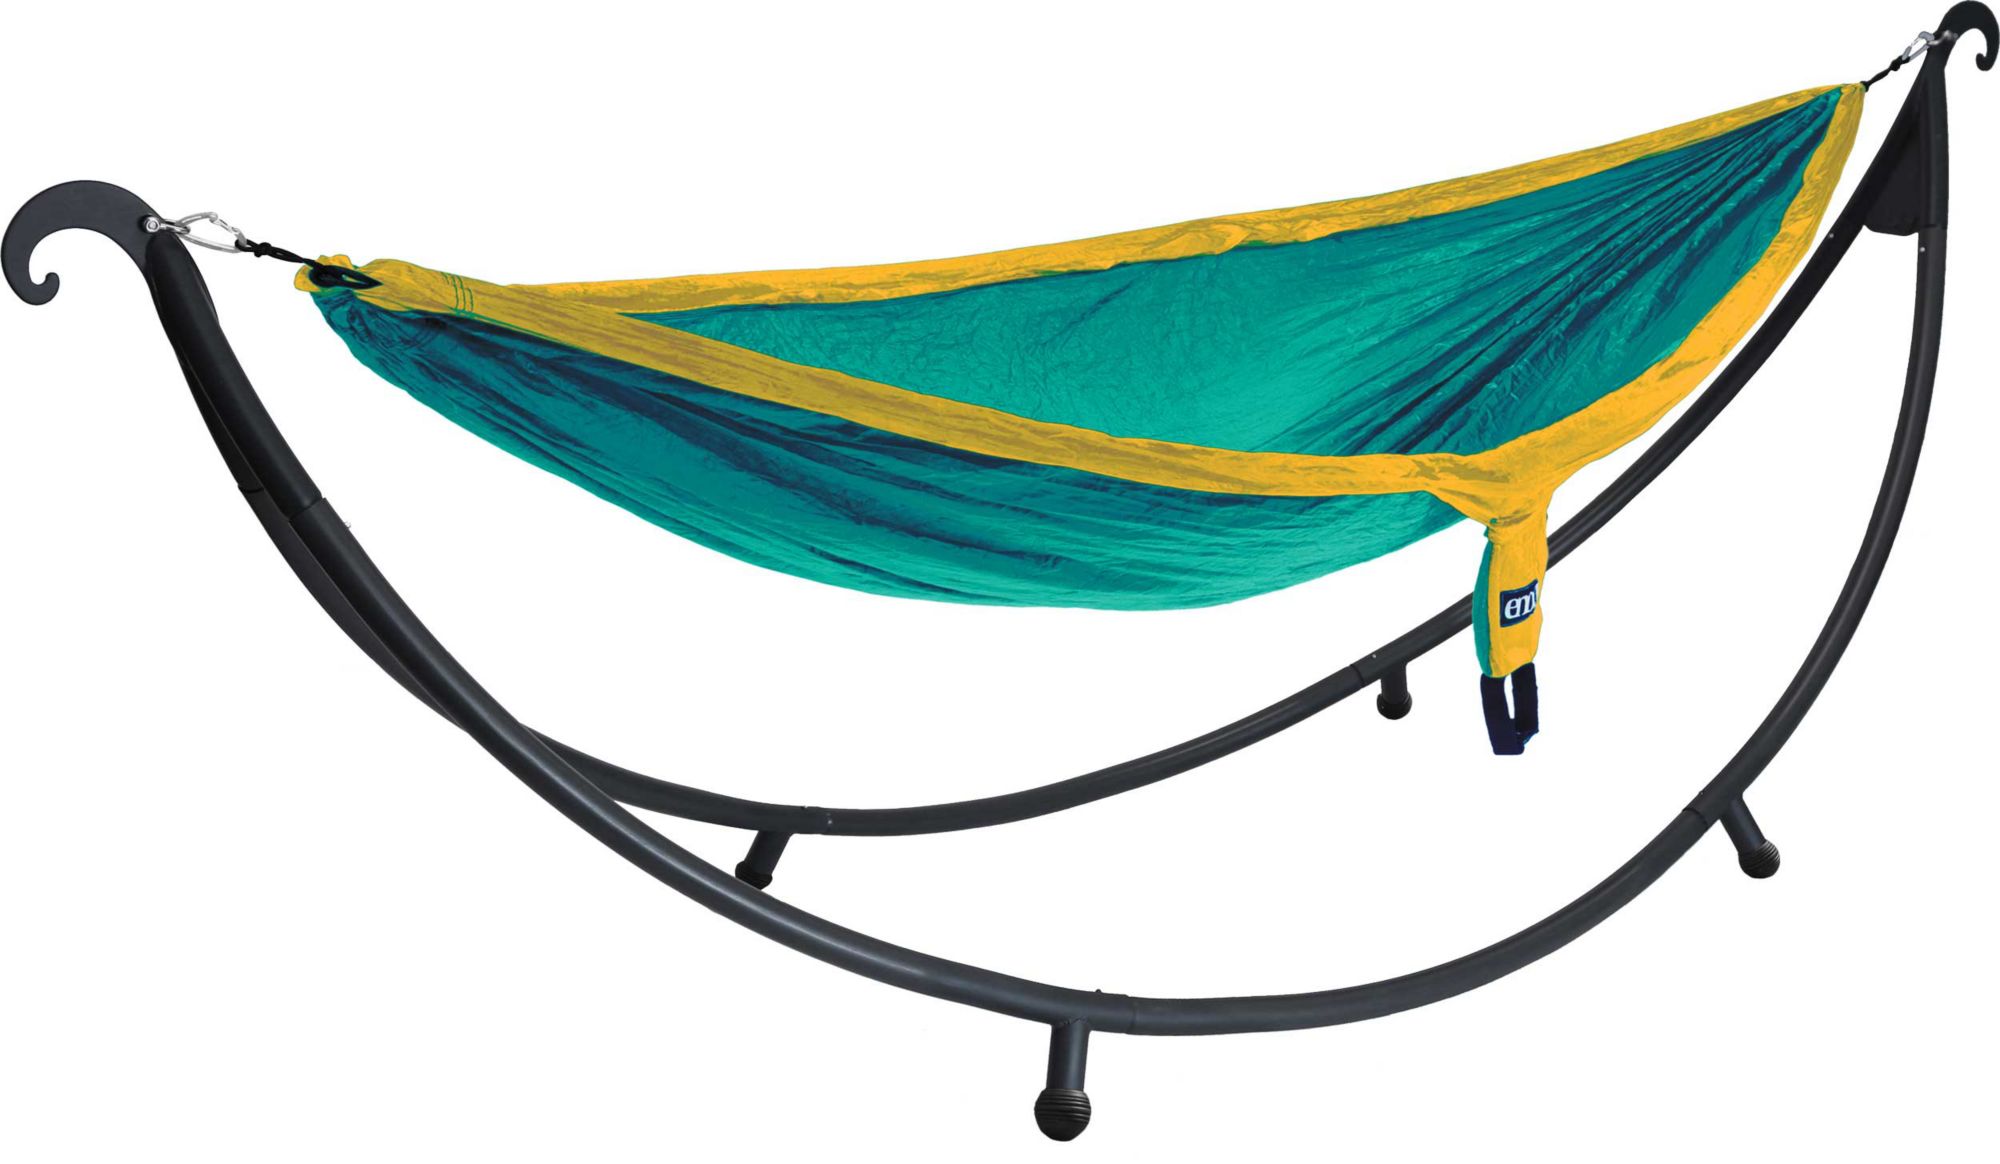 Photos - Other ENO SoloPod Hammock Stand 17ENOUSLPDHMMCKSTODR 